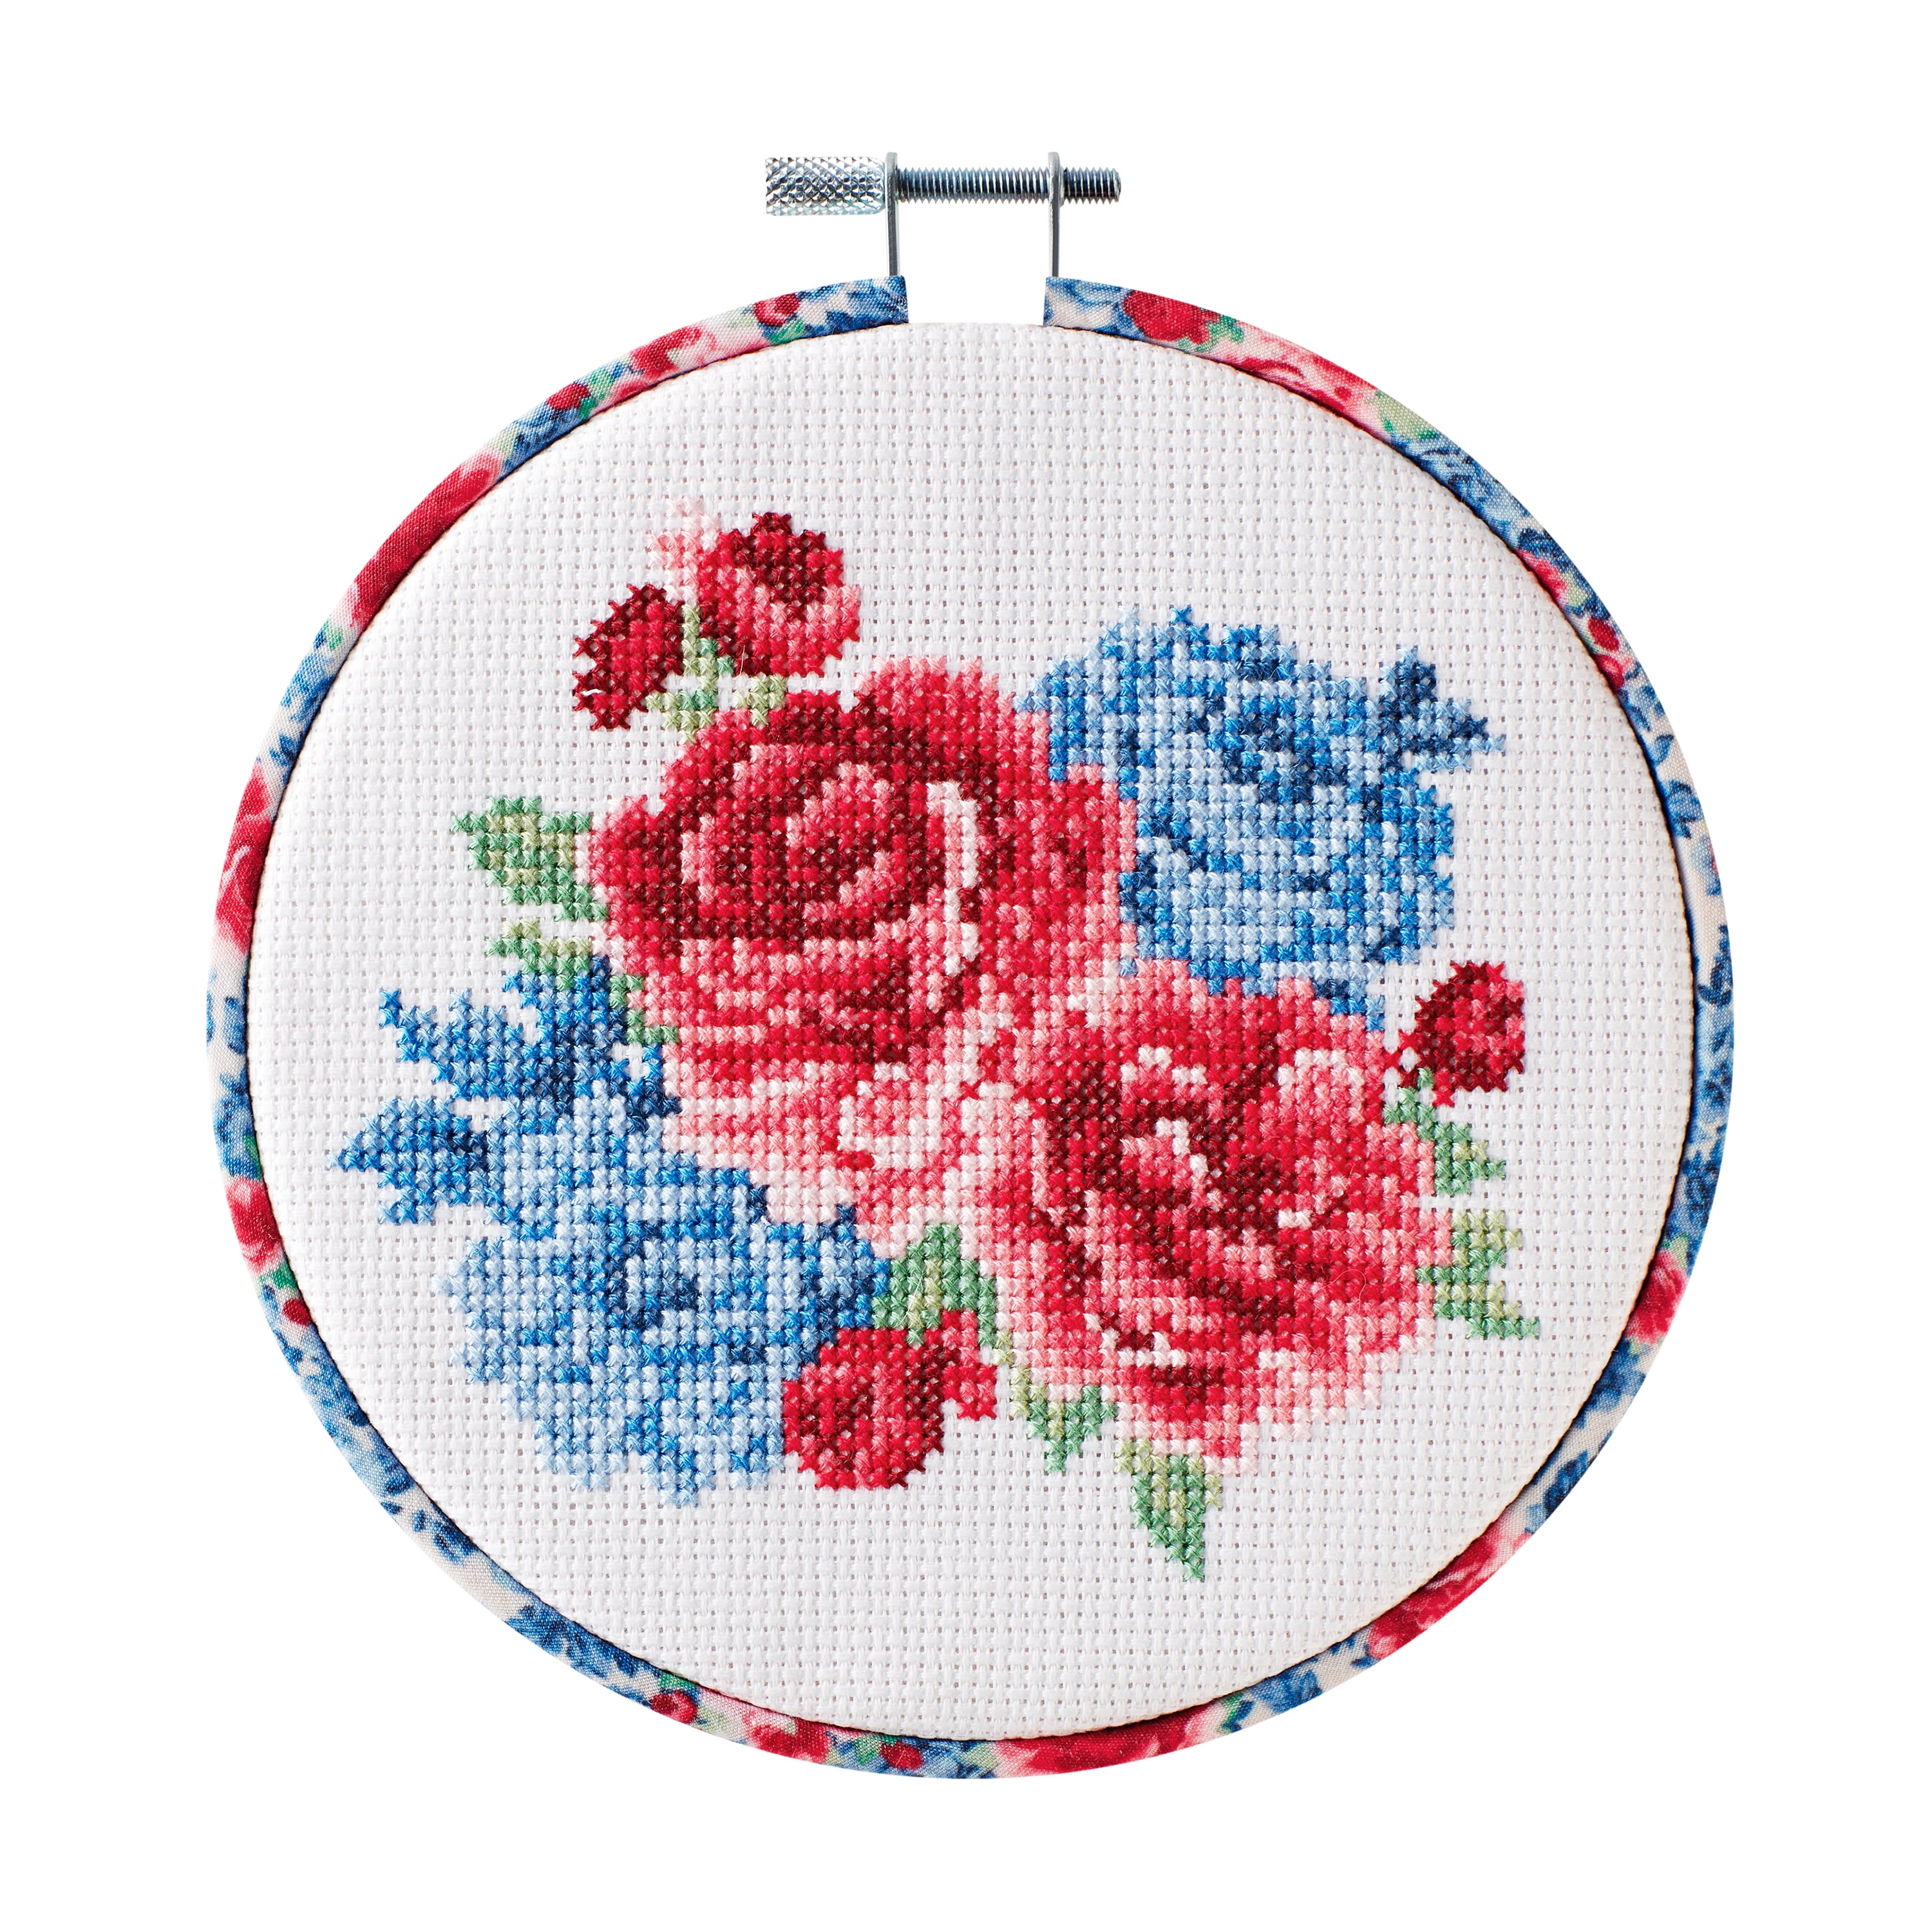 How to choose embroidery needle: 4 conditions to consider - Stitch Floral